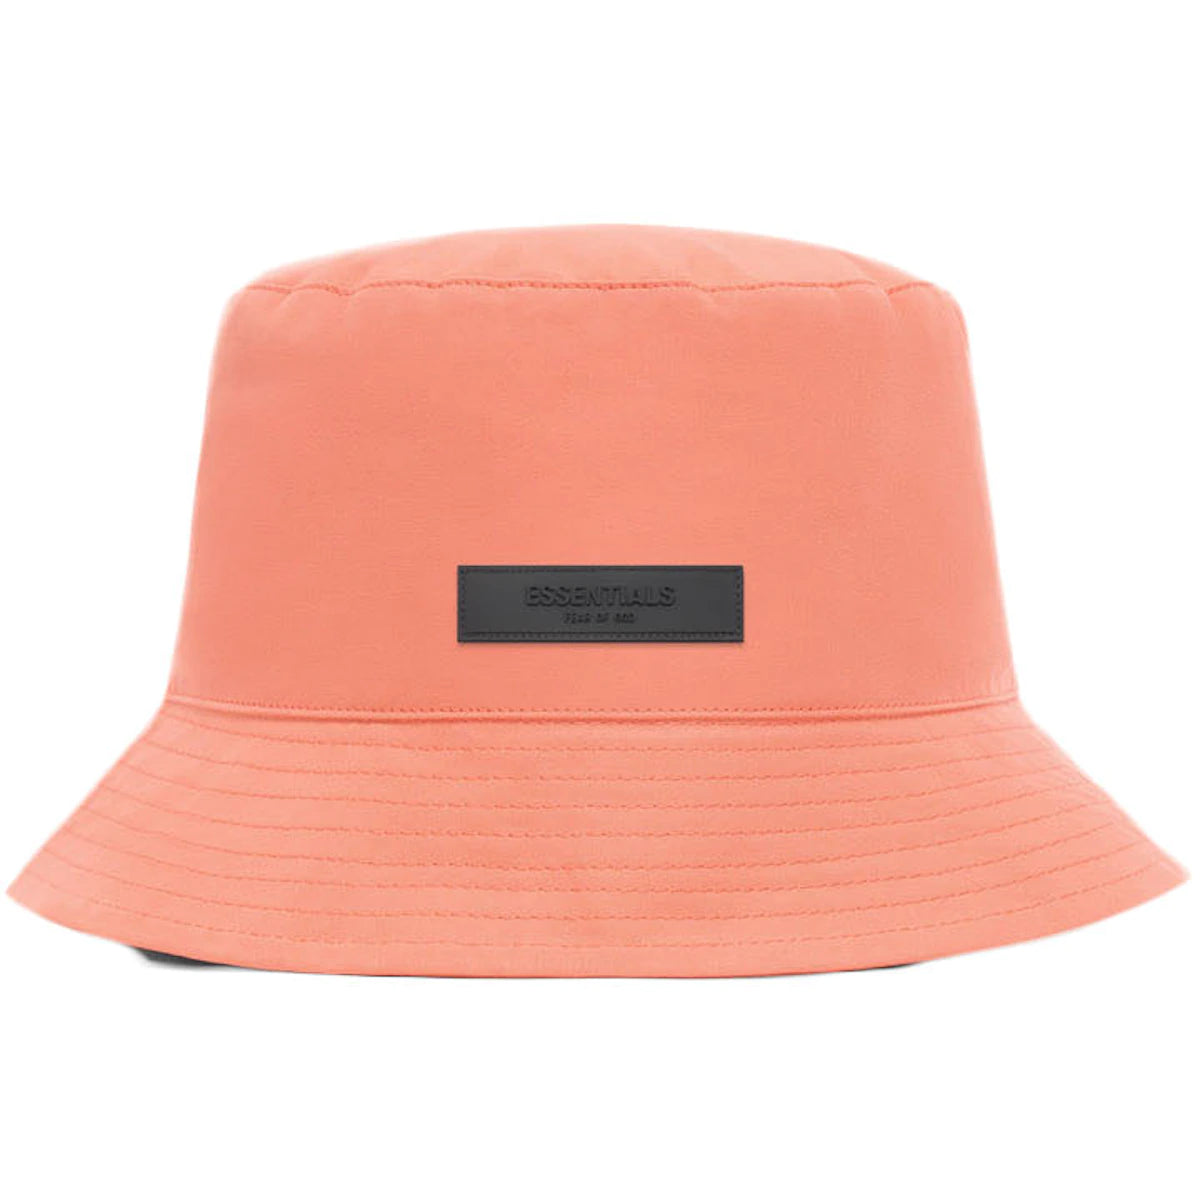 Fear of God Essentials Coral Bucket Hat